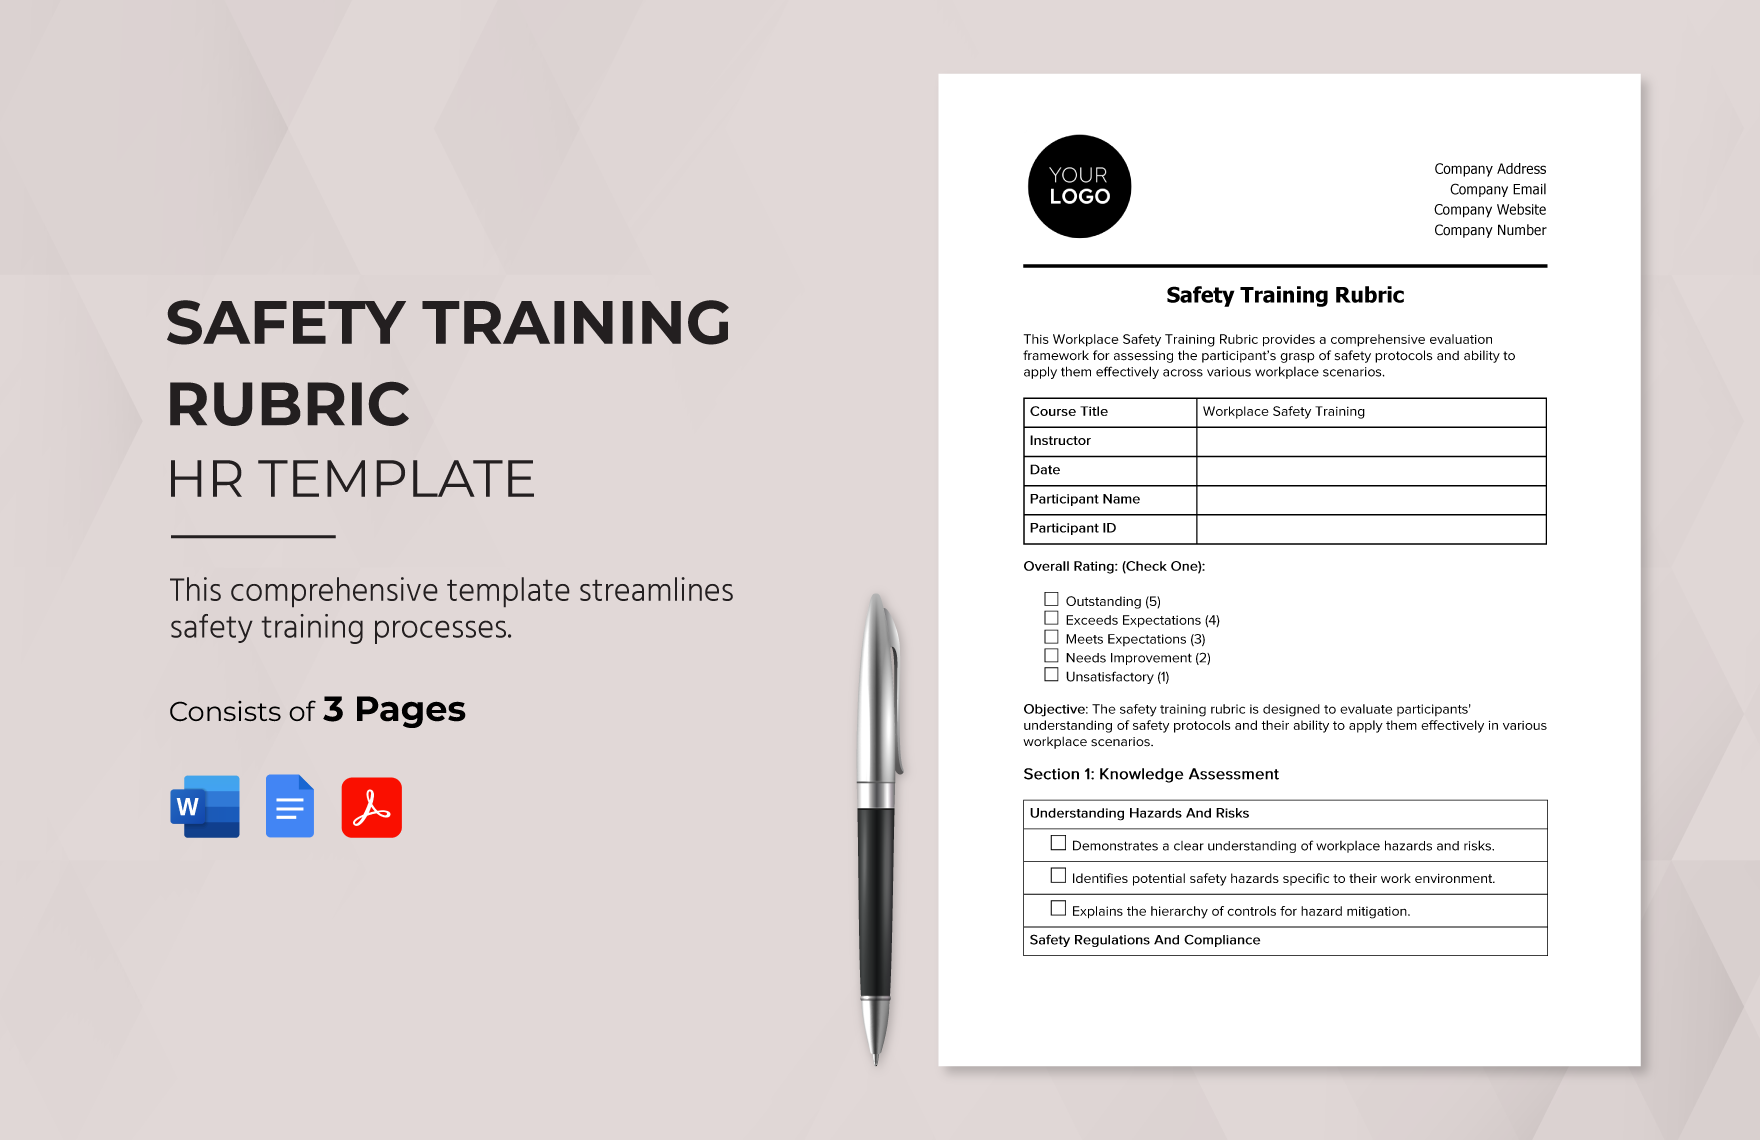 Safety Training Rubric HR Template